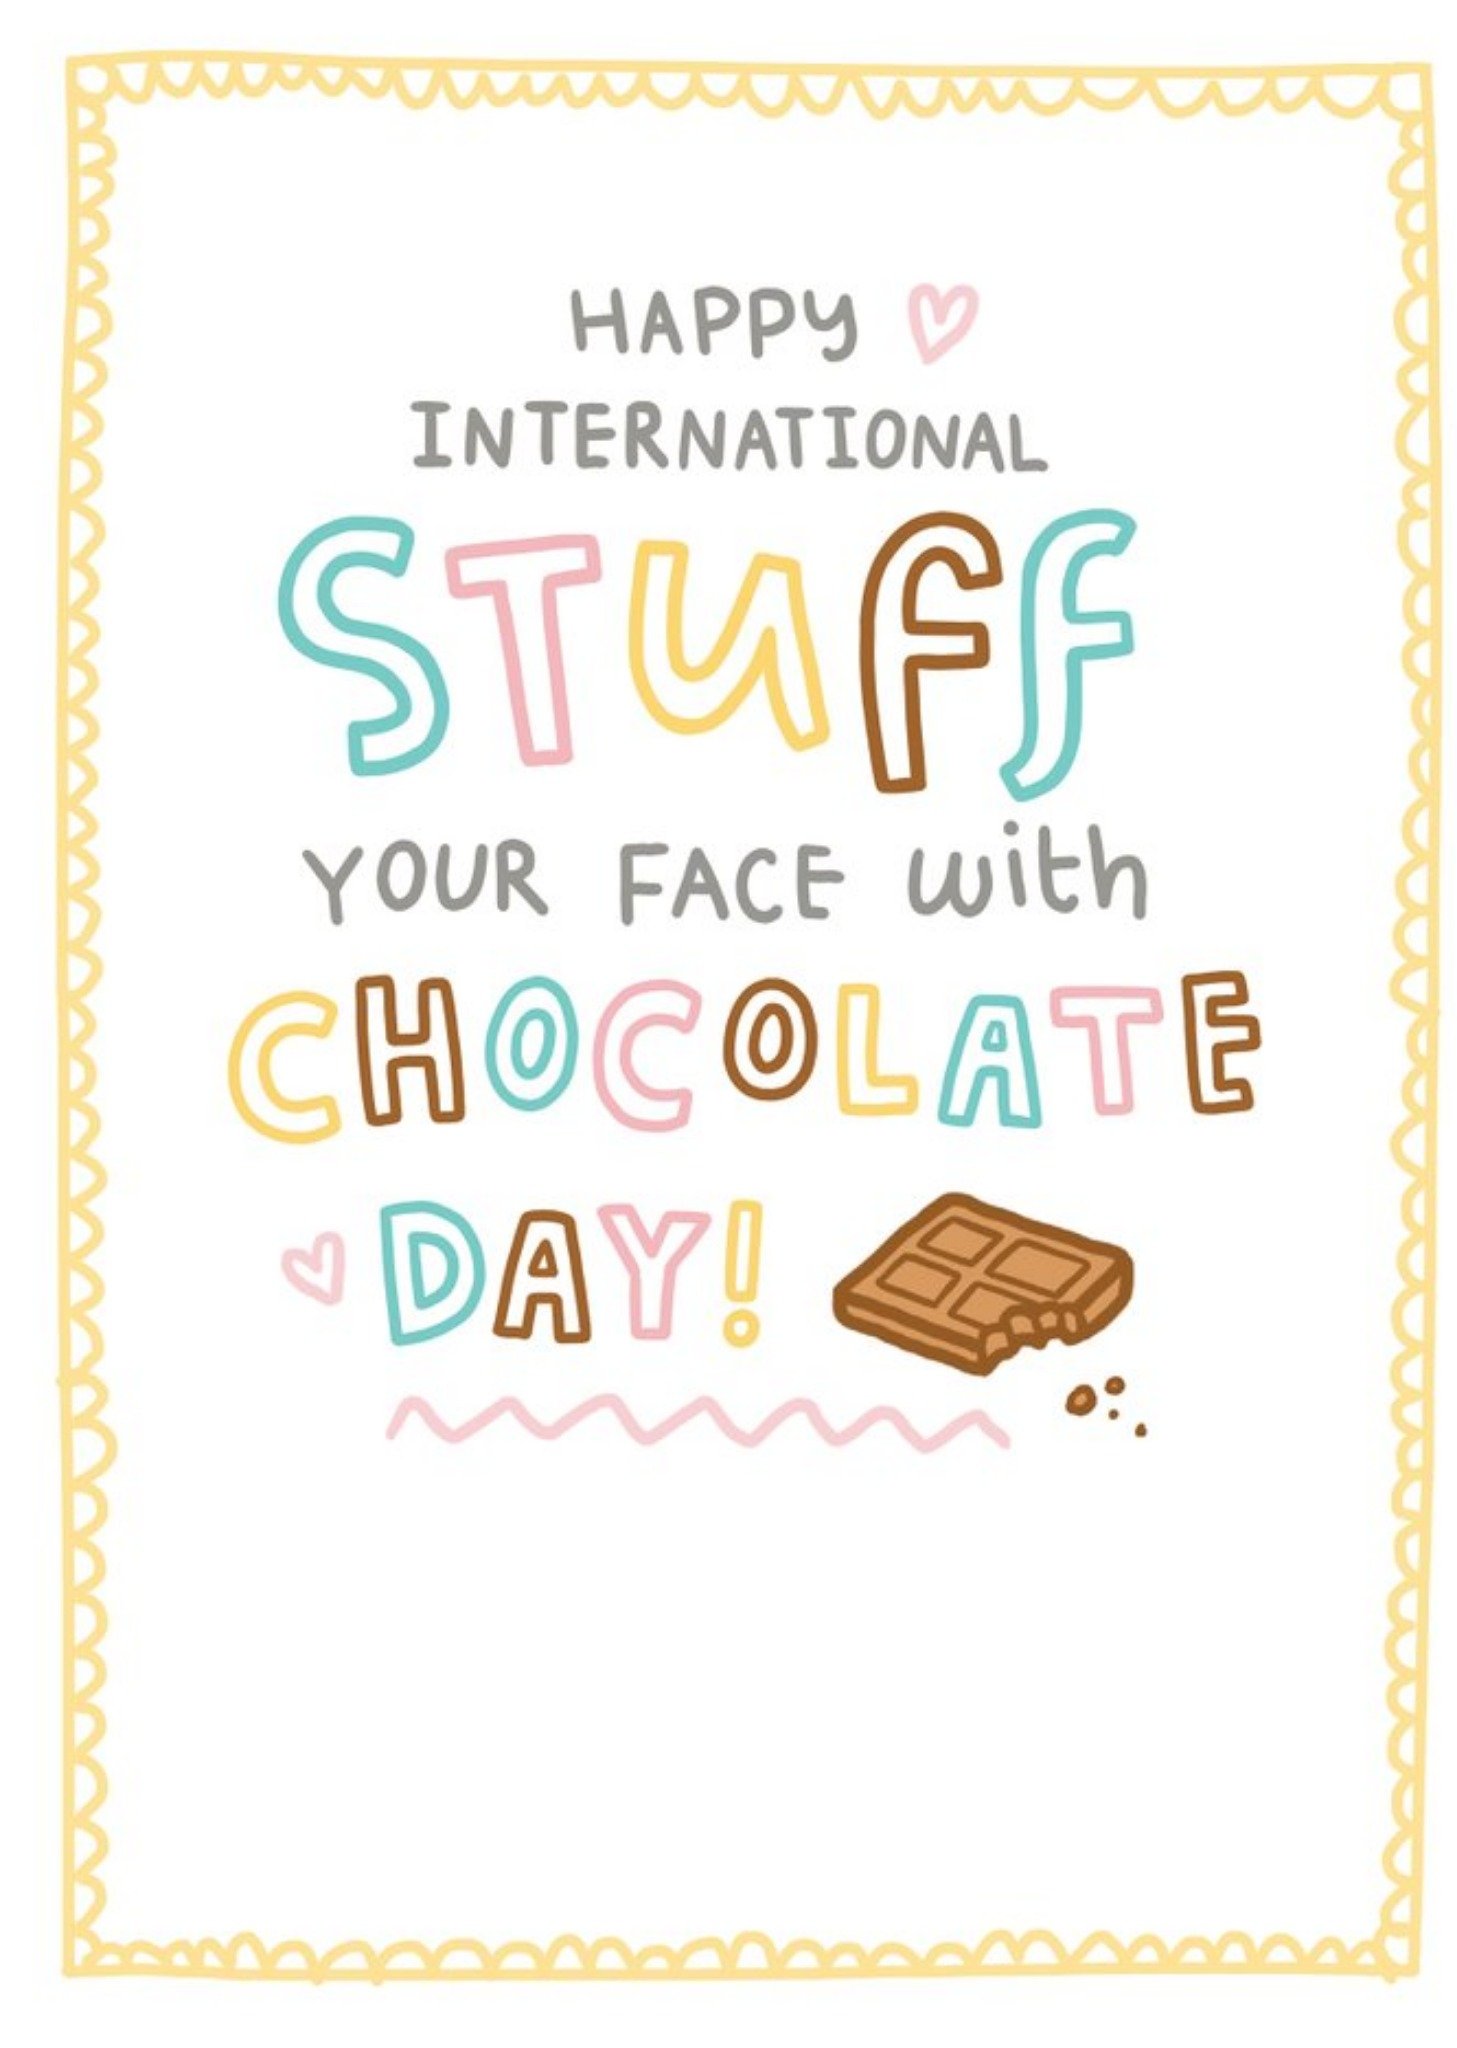 Moonpig Illustration Of Chocolate With Colourful Typography And A Frilly Border Humorous Easter Card